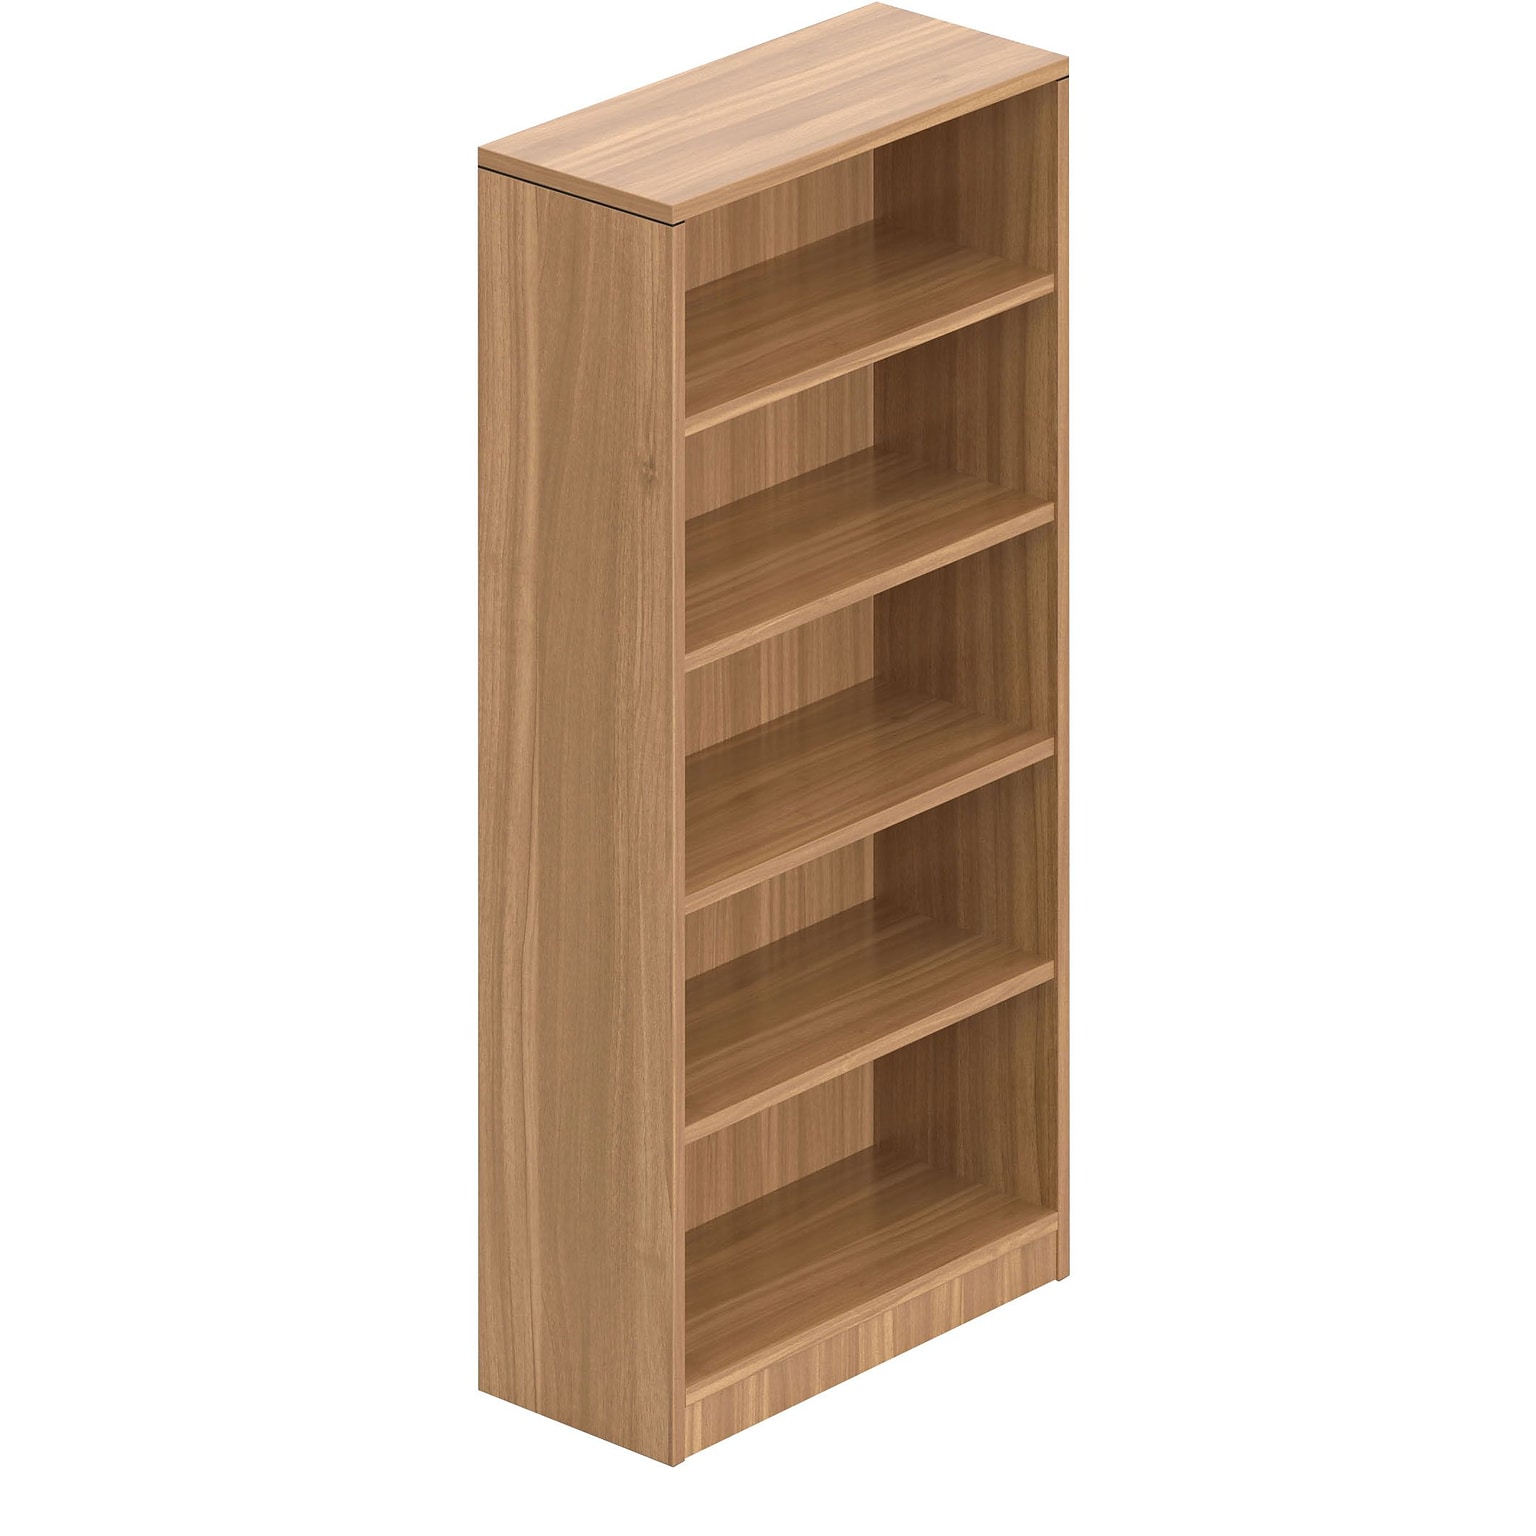 Offices to Go Superior Laminate 71H 4-Shelf Bookcase with Adjustable Shelves, Autumn Walnut (TDSL71BC-AWL)